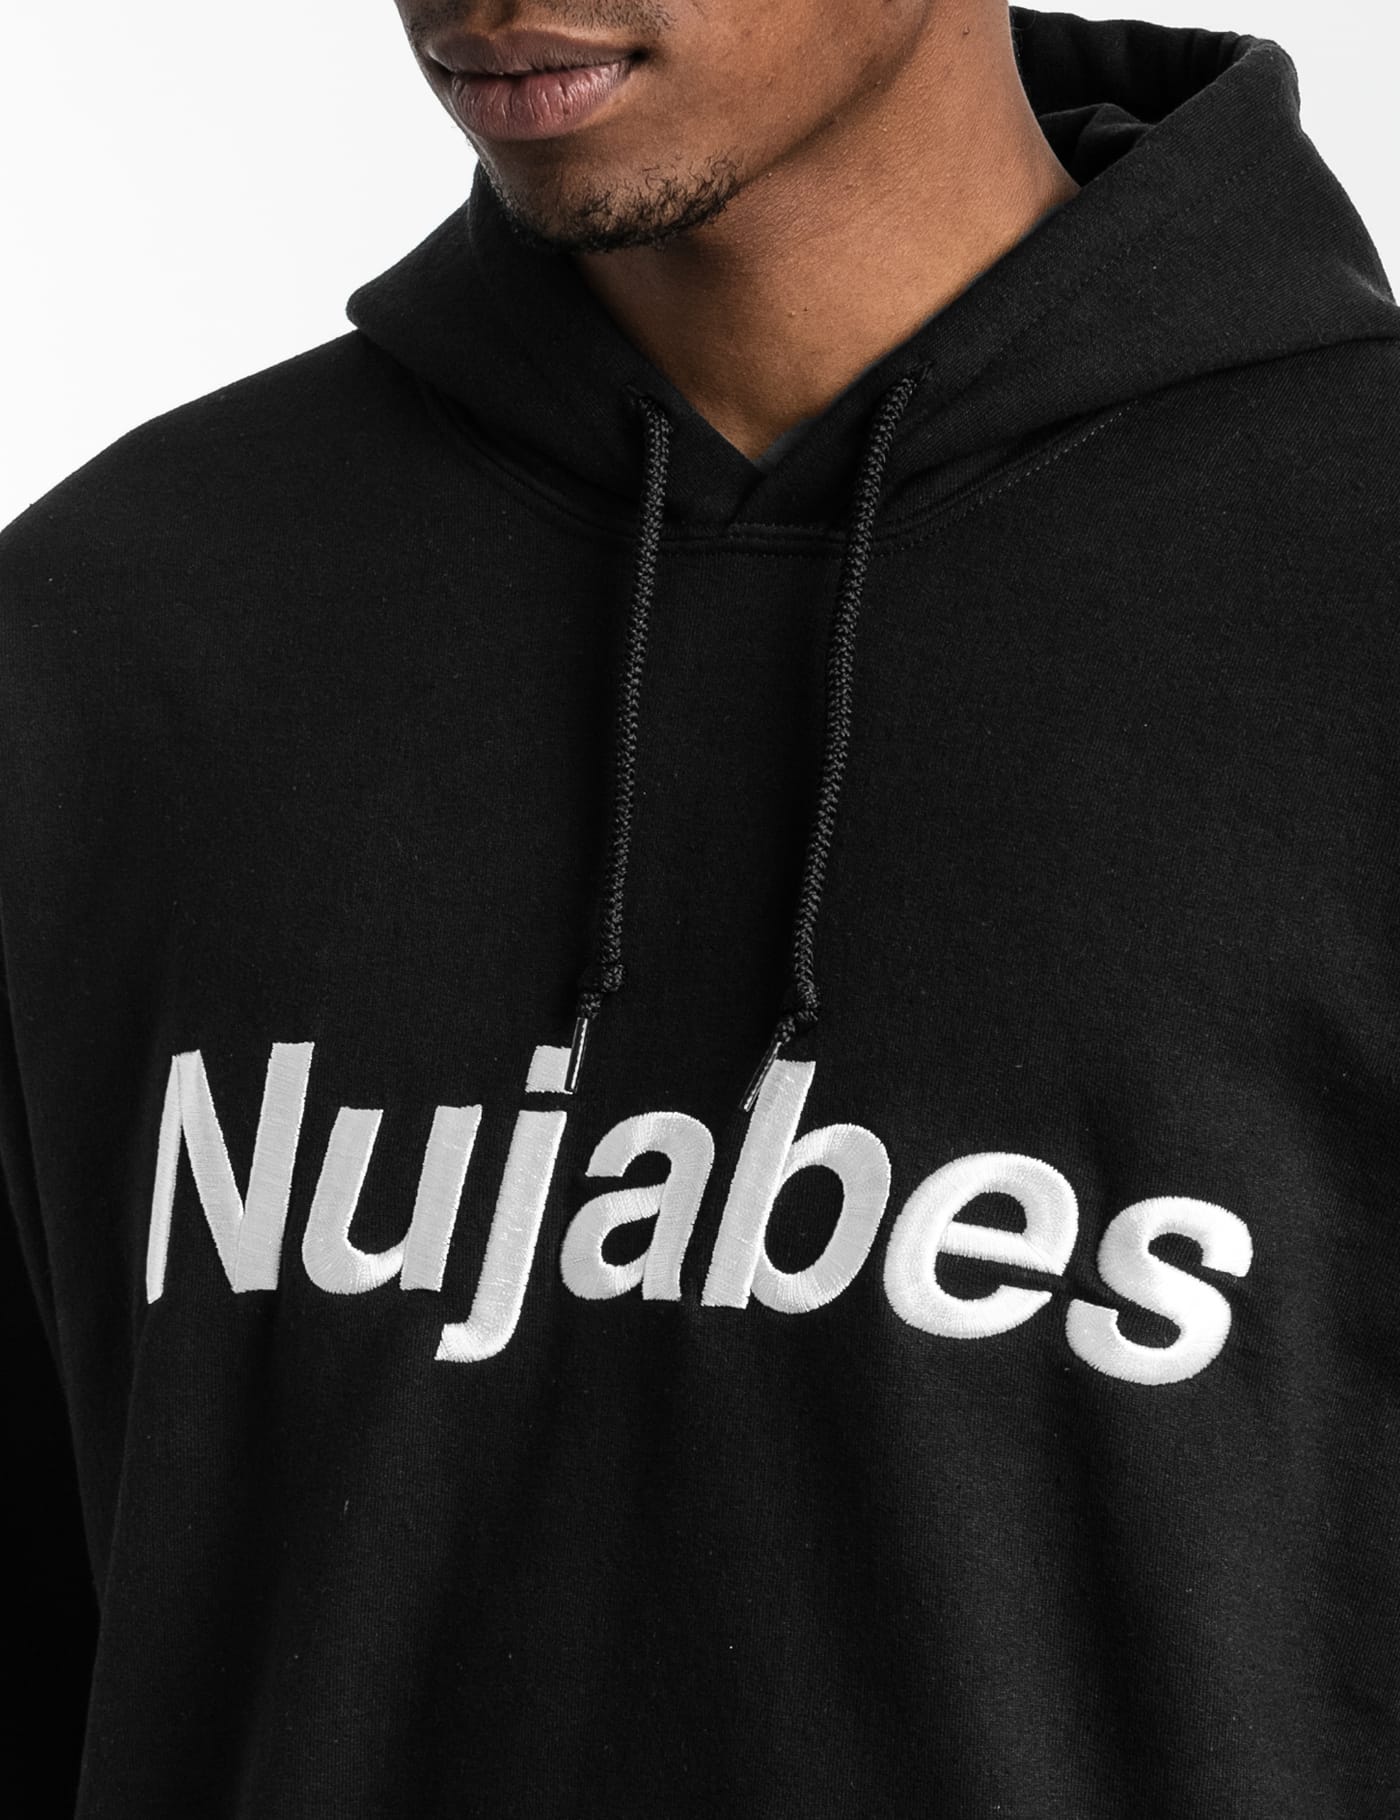 Yen Town Market - Nujabes Logo Hoodie | HBX - Globally Curated